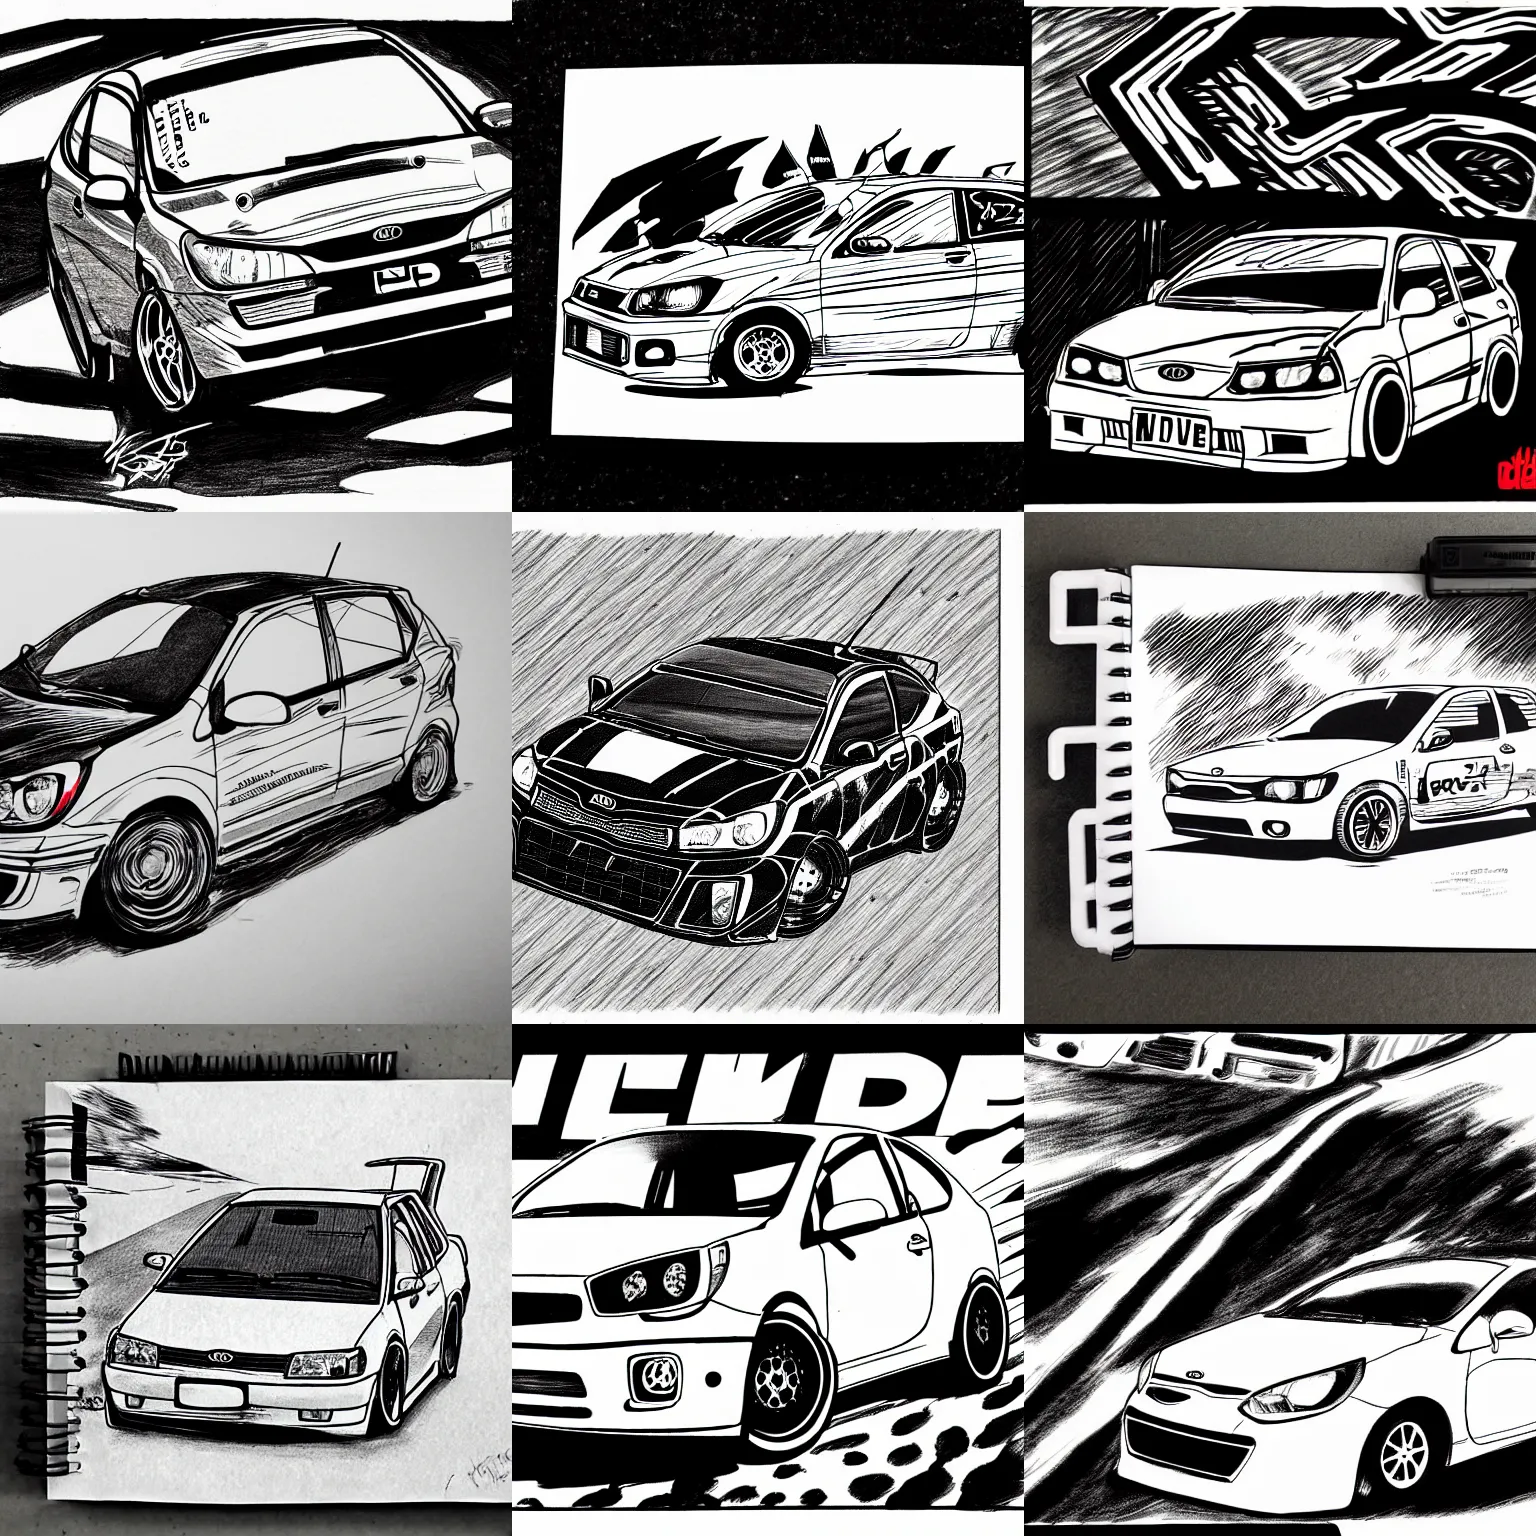 Prompt: Kia Rio hatchback drifting, page from Initial D manga, ink drawing, black and white